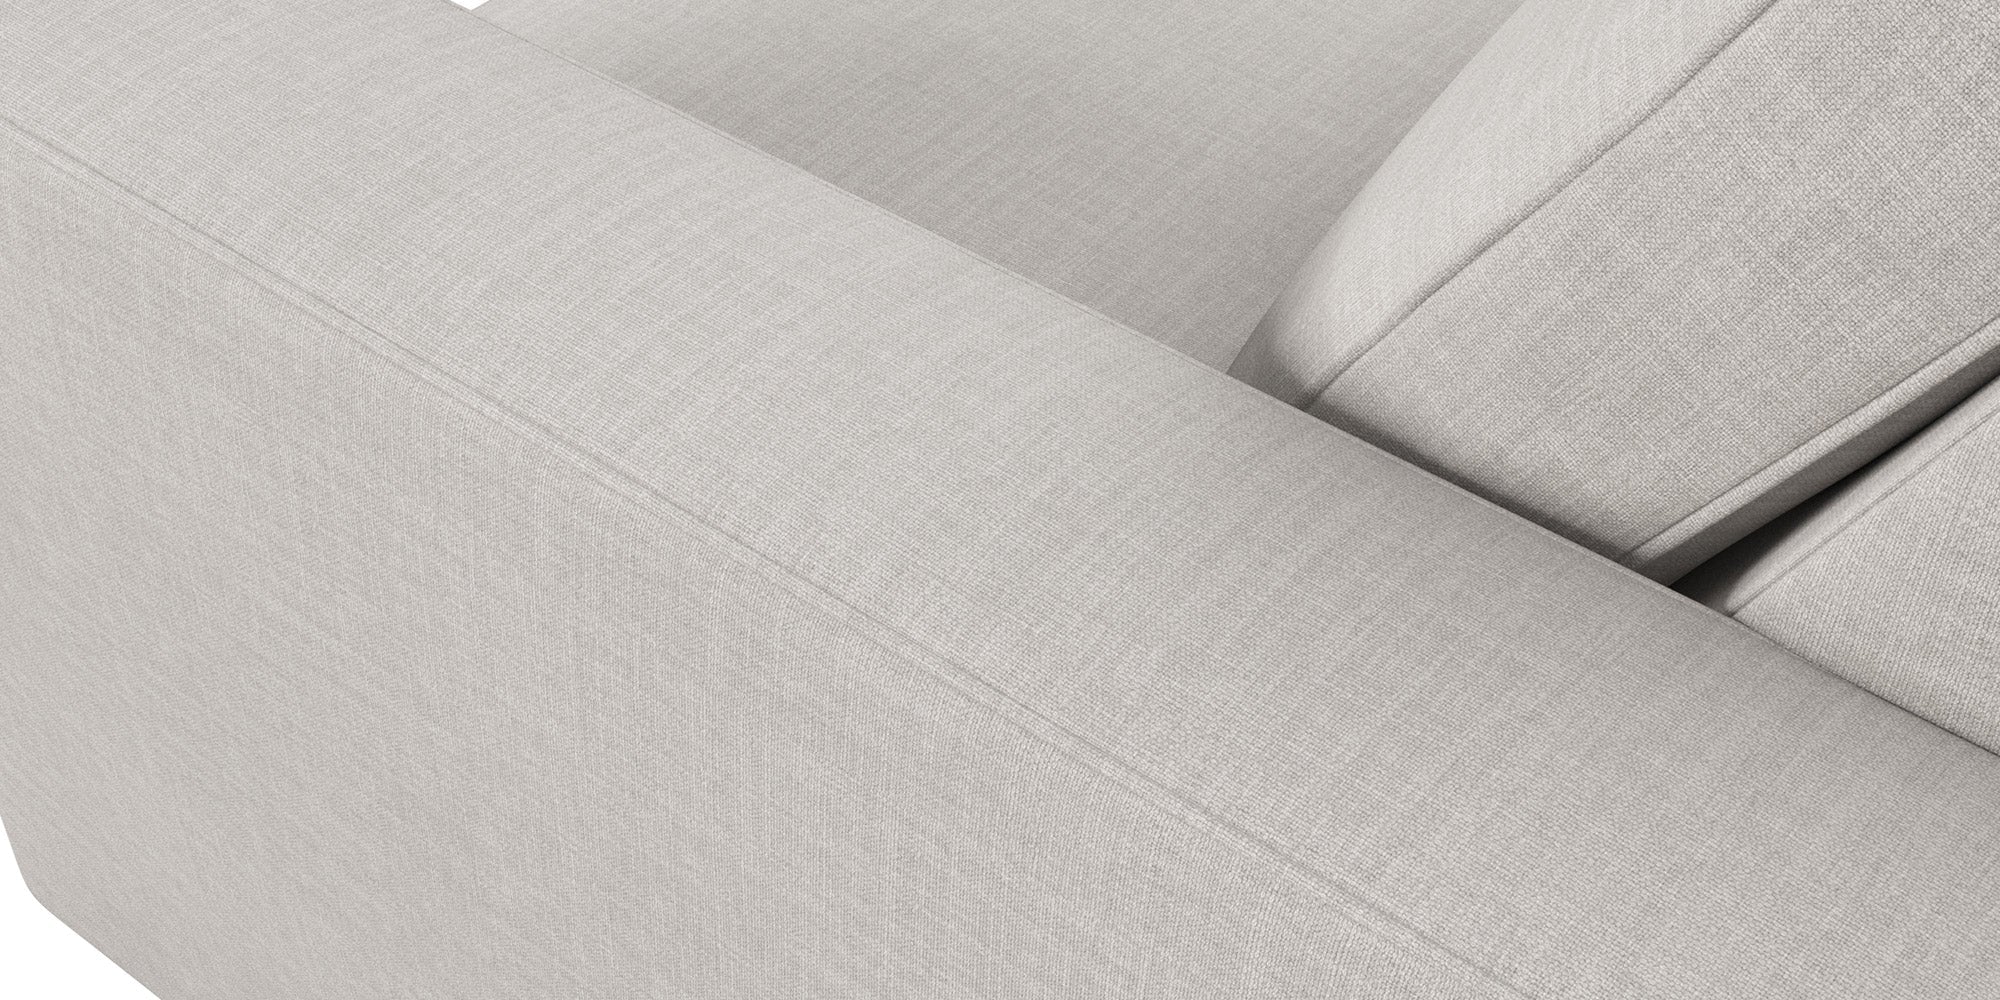 IRL: Rio Sectional, shown here in Texture Haze fabric and Dave Cafe legs.